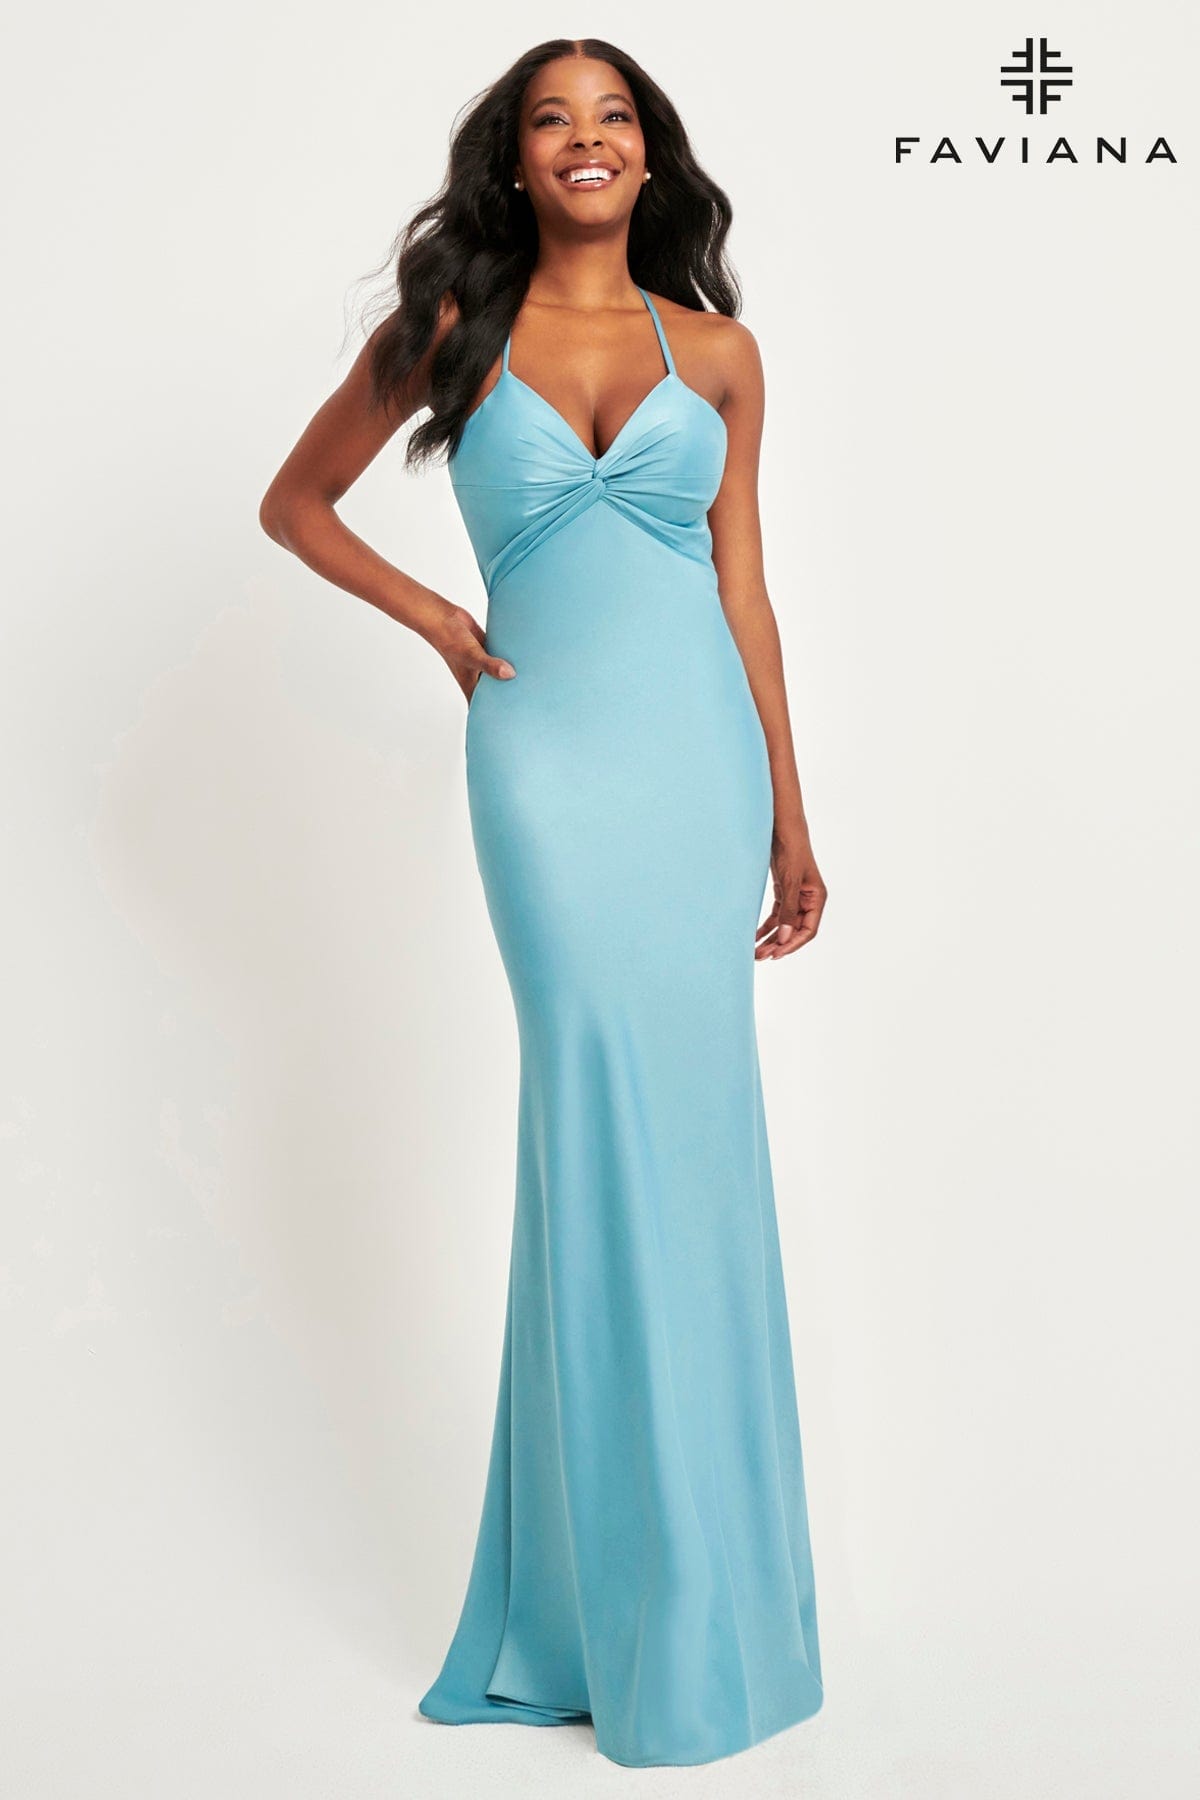 Pacific Blue Dress for Prom